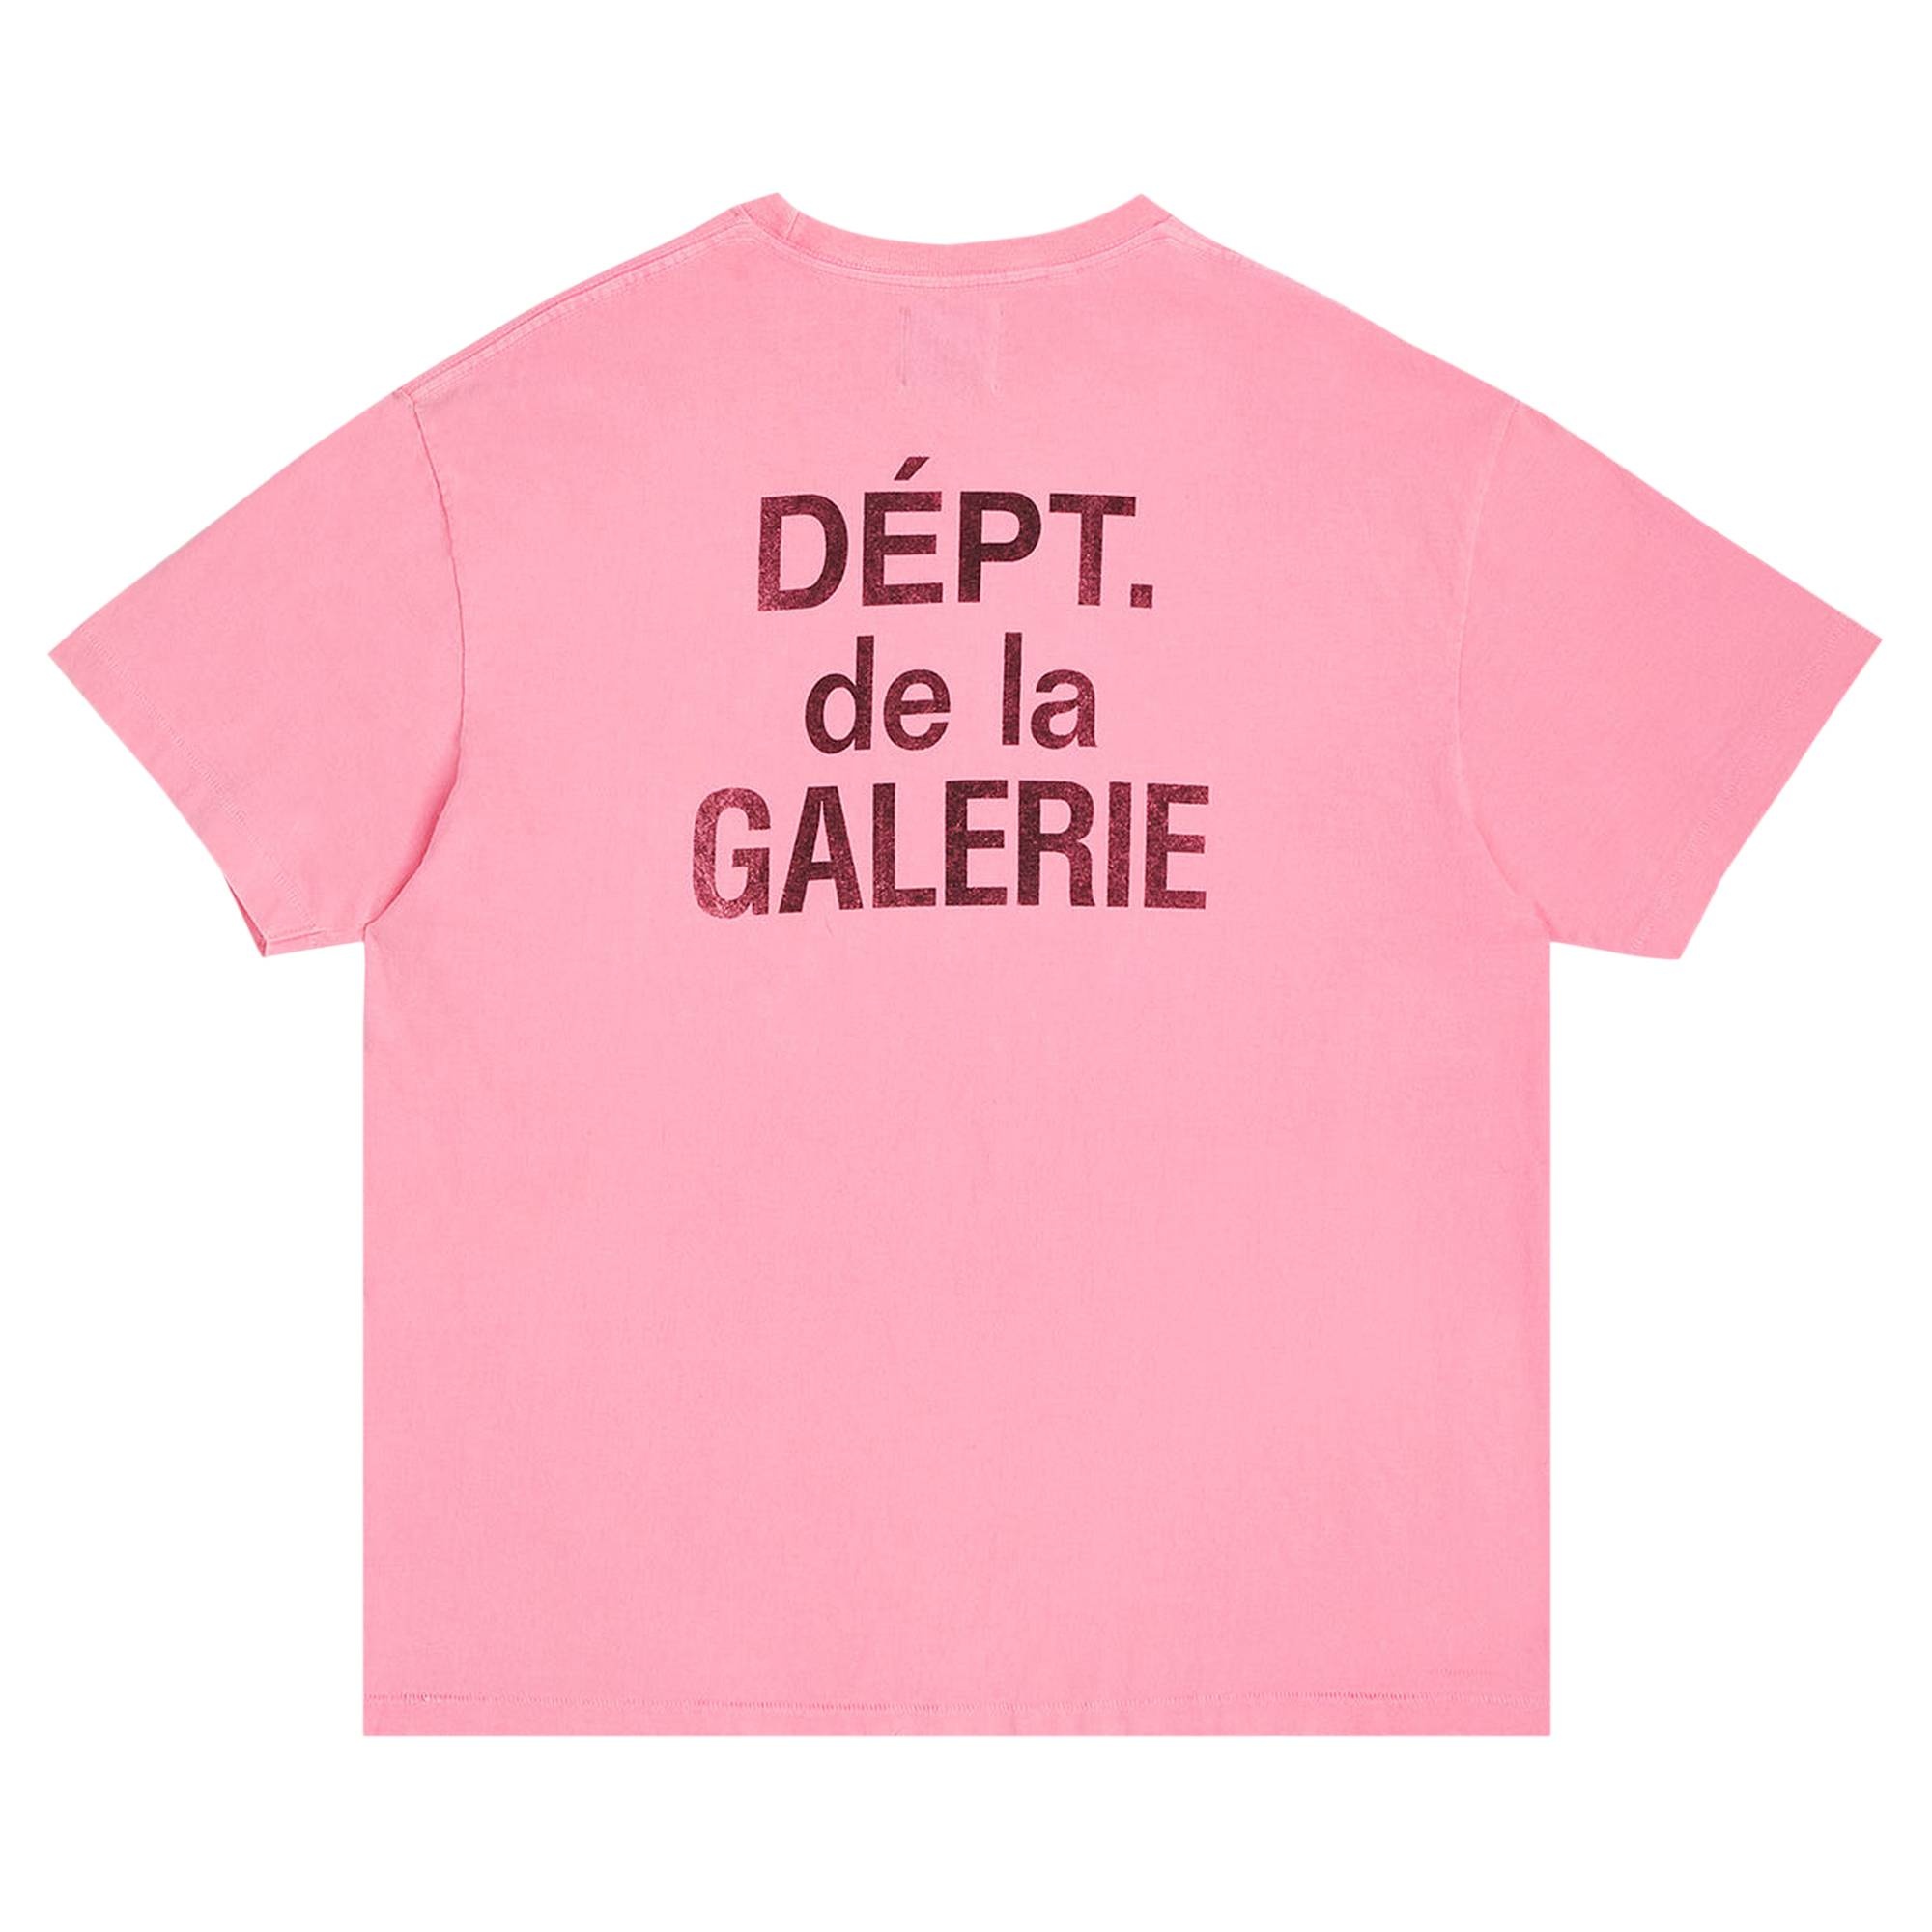 Gallery Dept. French Tee 'Flo Pink' - 2